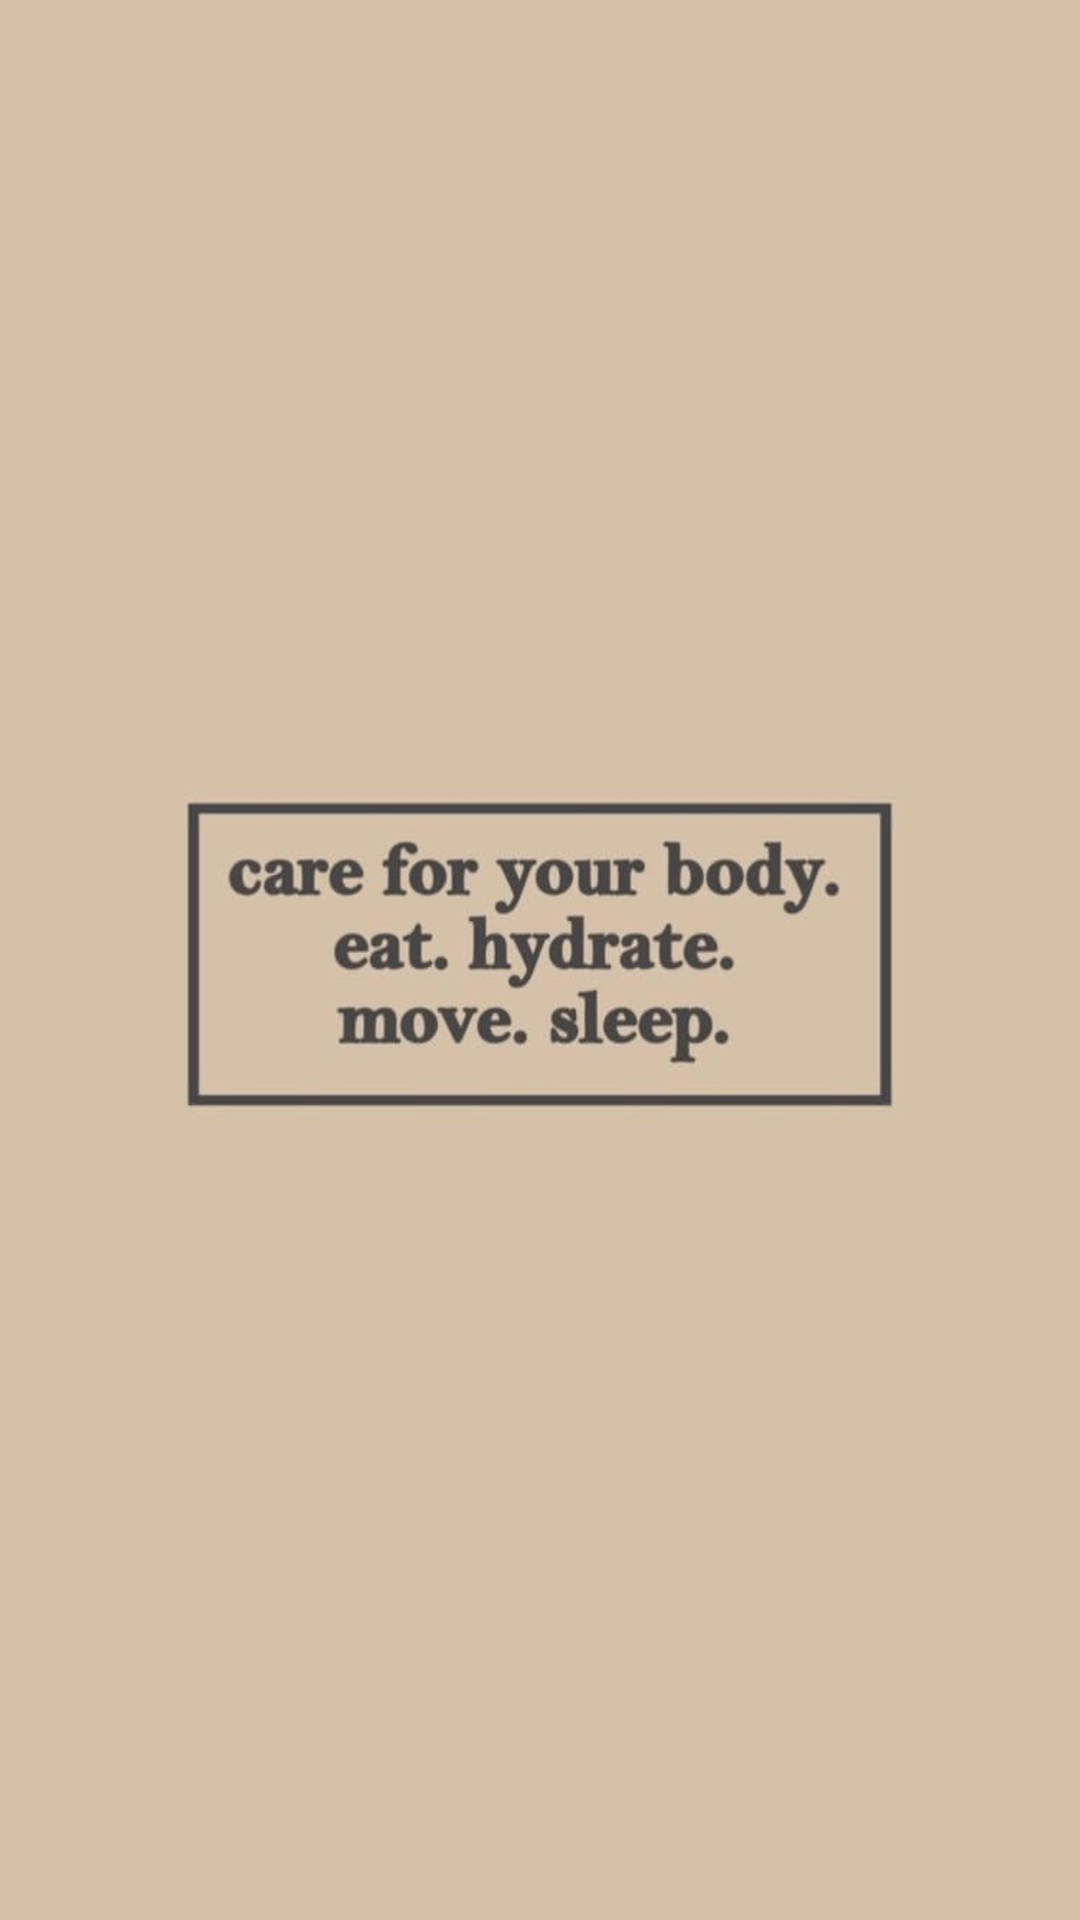 Aesthetic Beige Self-care Quote Background